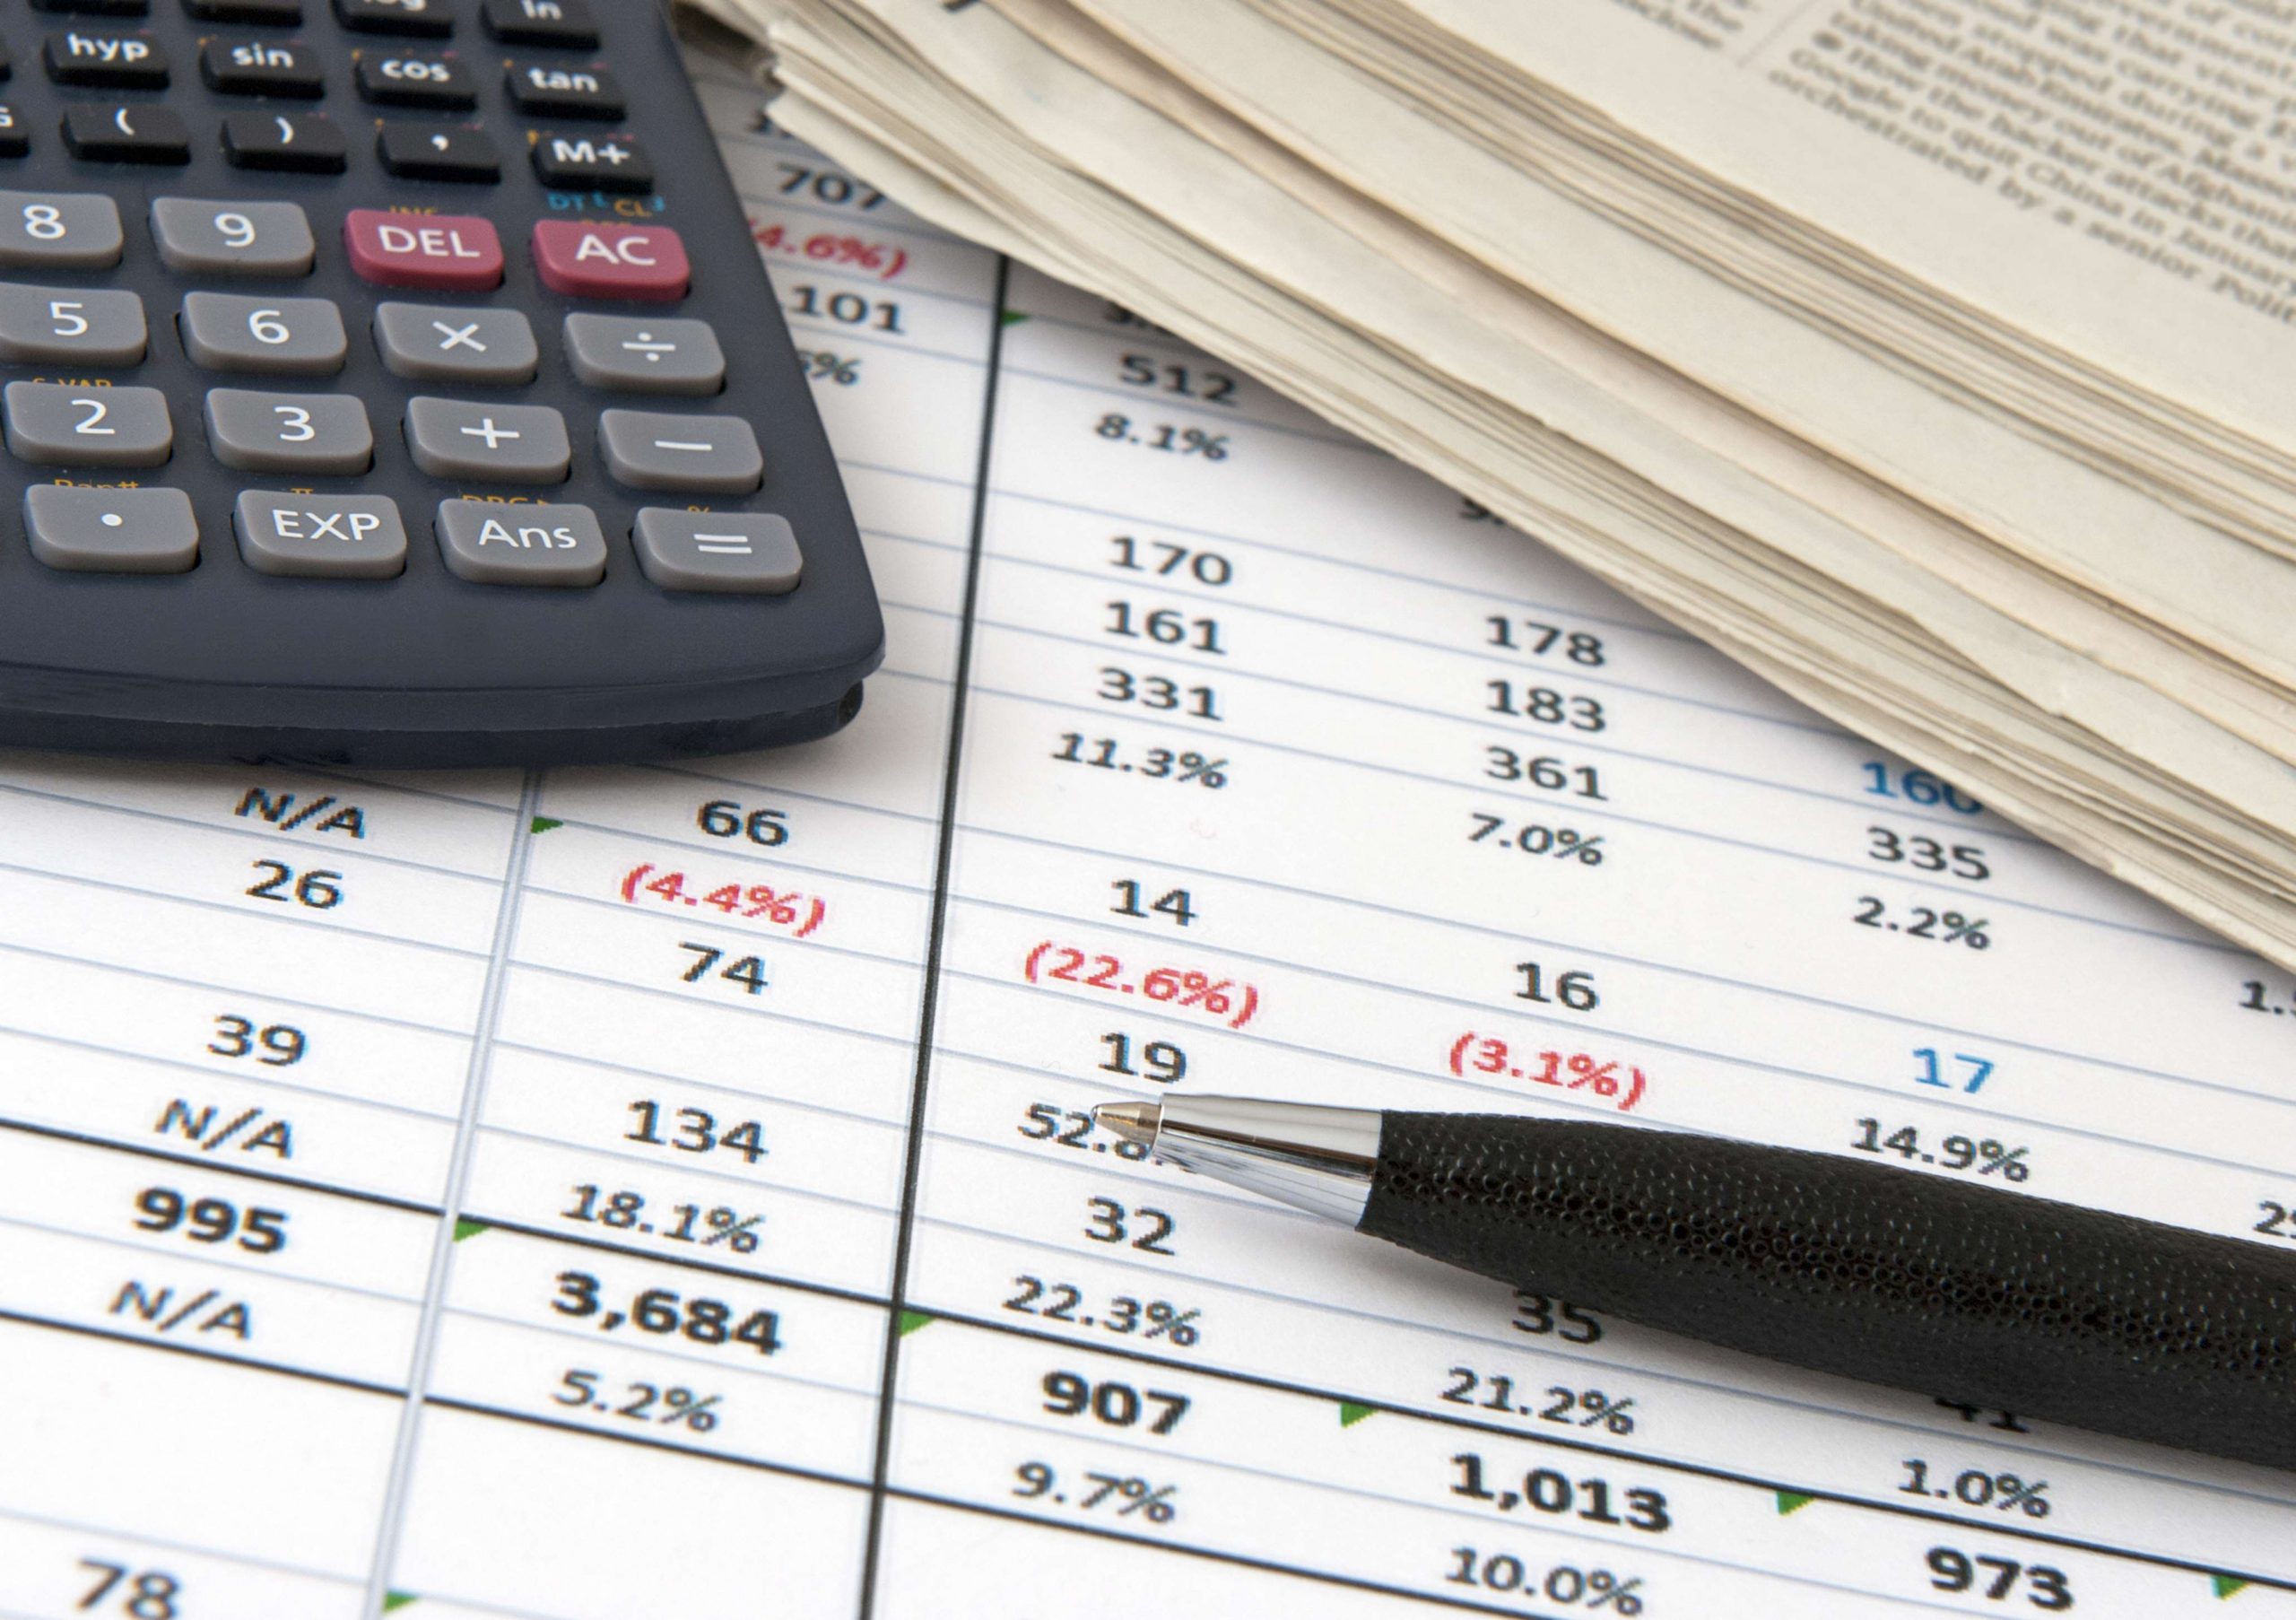 how to calculate retained earnings on balance sheet